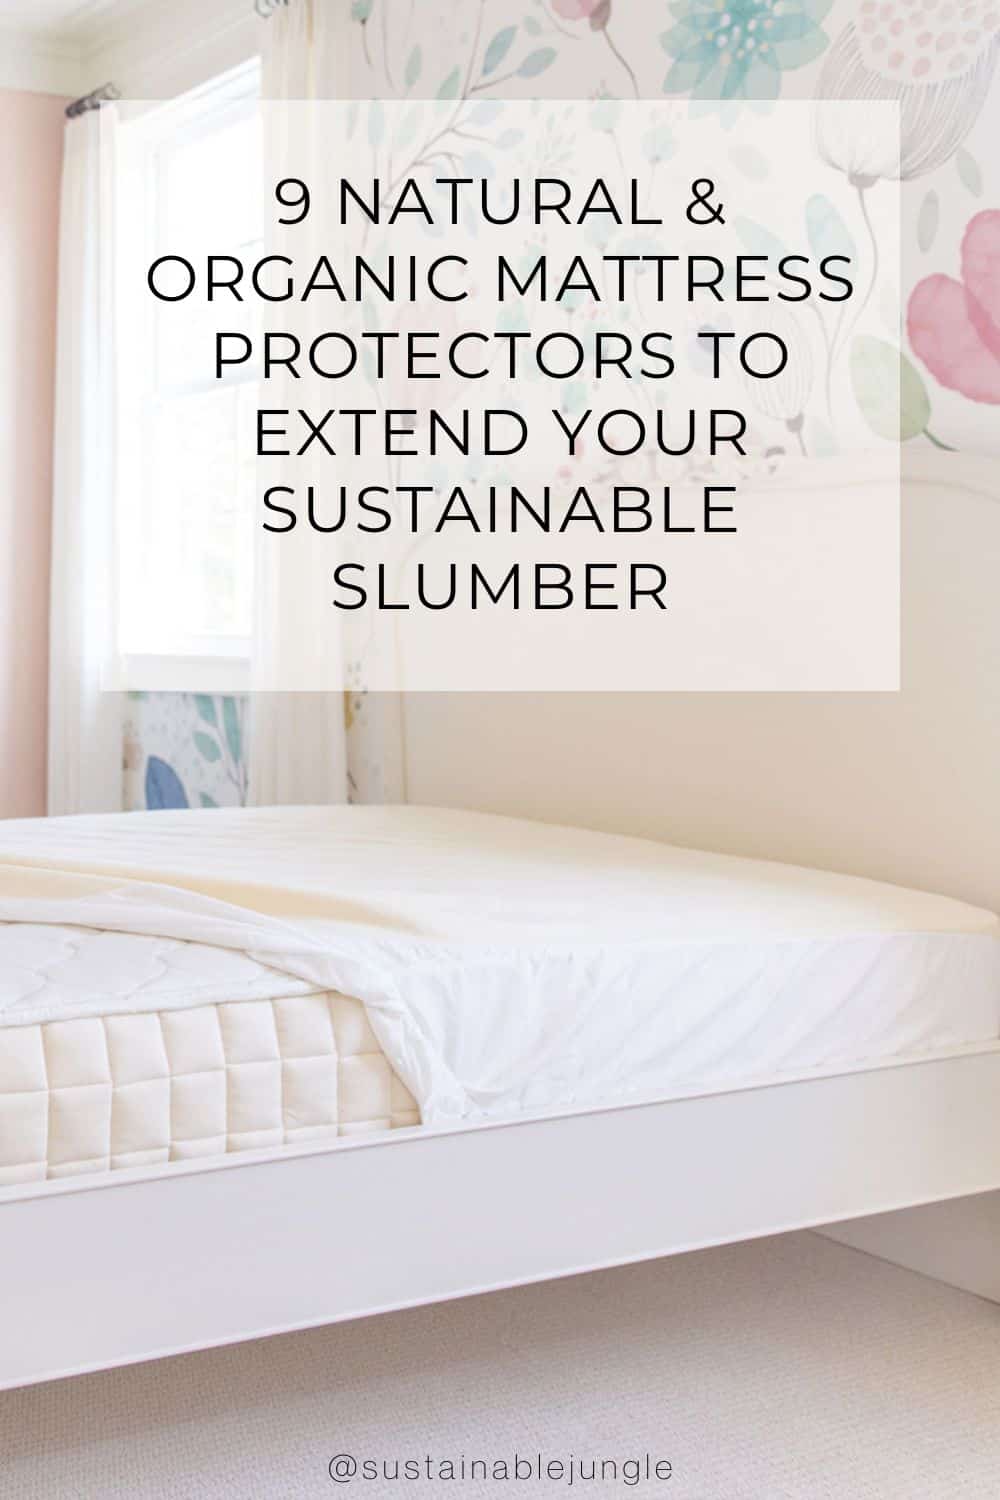 9 Natural & Organic Mattress Protectors To Extend Your Sustainable Slumber Image by Naturepedic #organicmattressprotectors #organicmattresspad #organiccottonmattressprotector #nontoxicwaterproofmattresspad #nontoxicmattessprotectors #nontoxicmattresscover #sustainablejungle